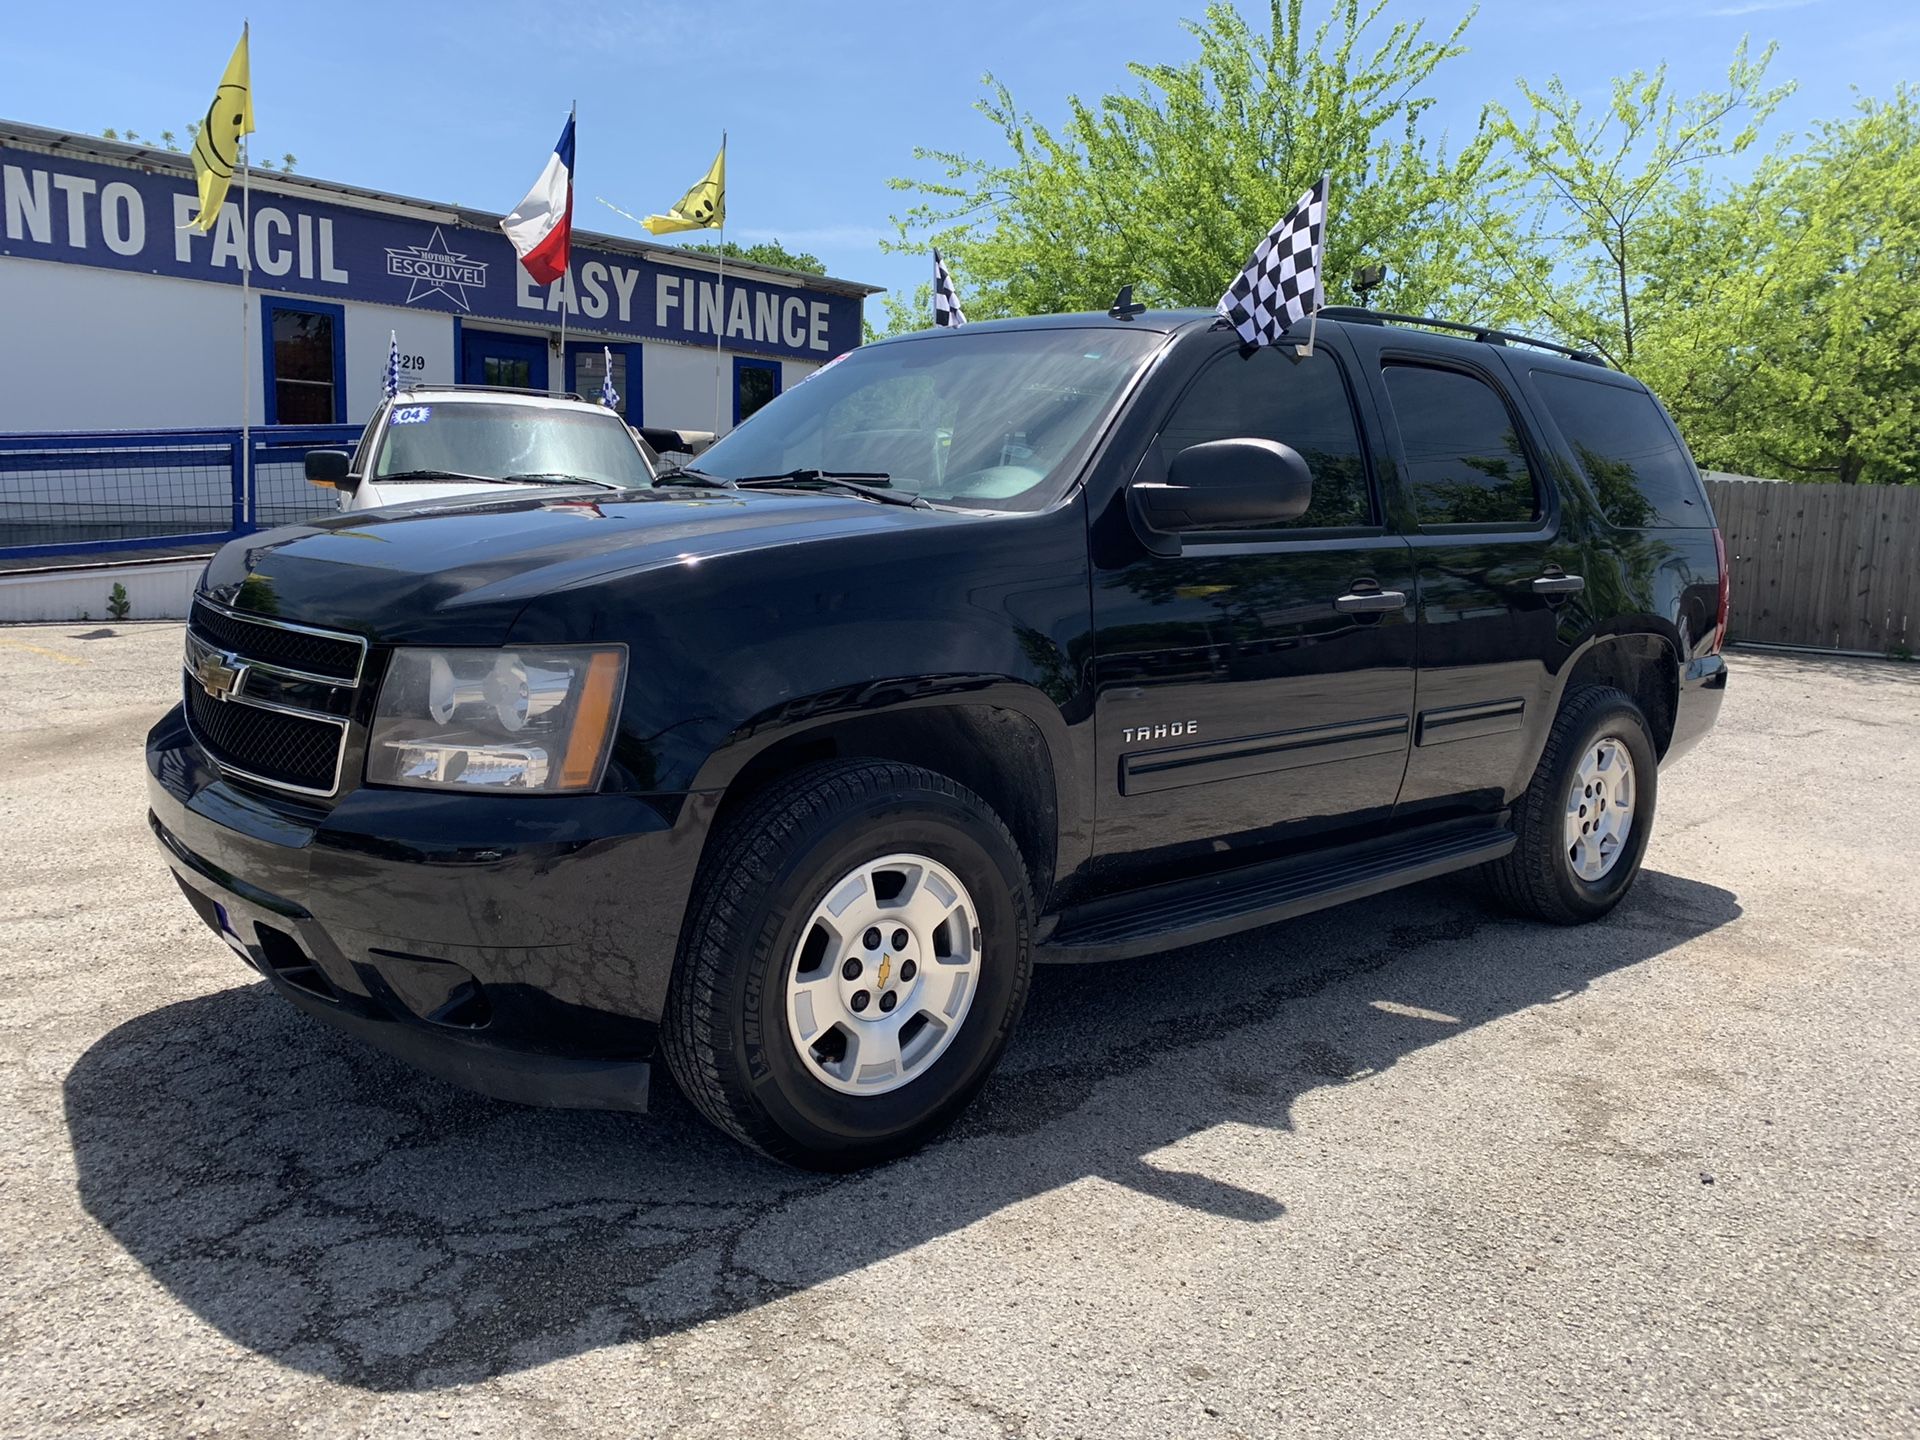 💙💙2009 Chevy Tahoe💙💙 $$10,999 with $$1499 down Payment S.Austin ~~~